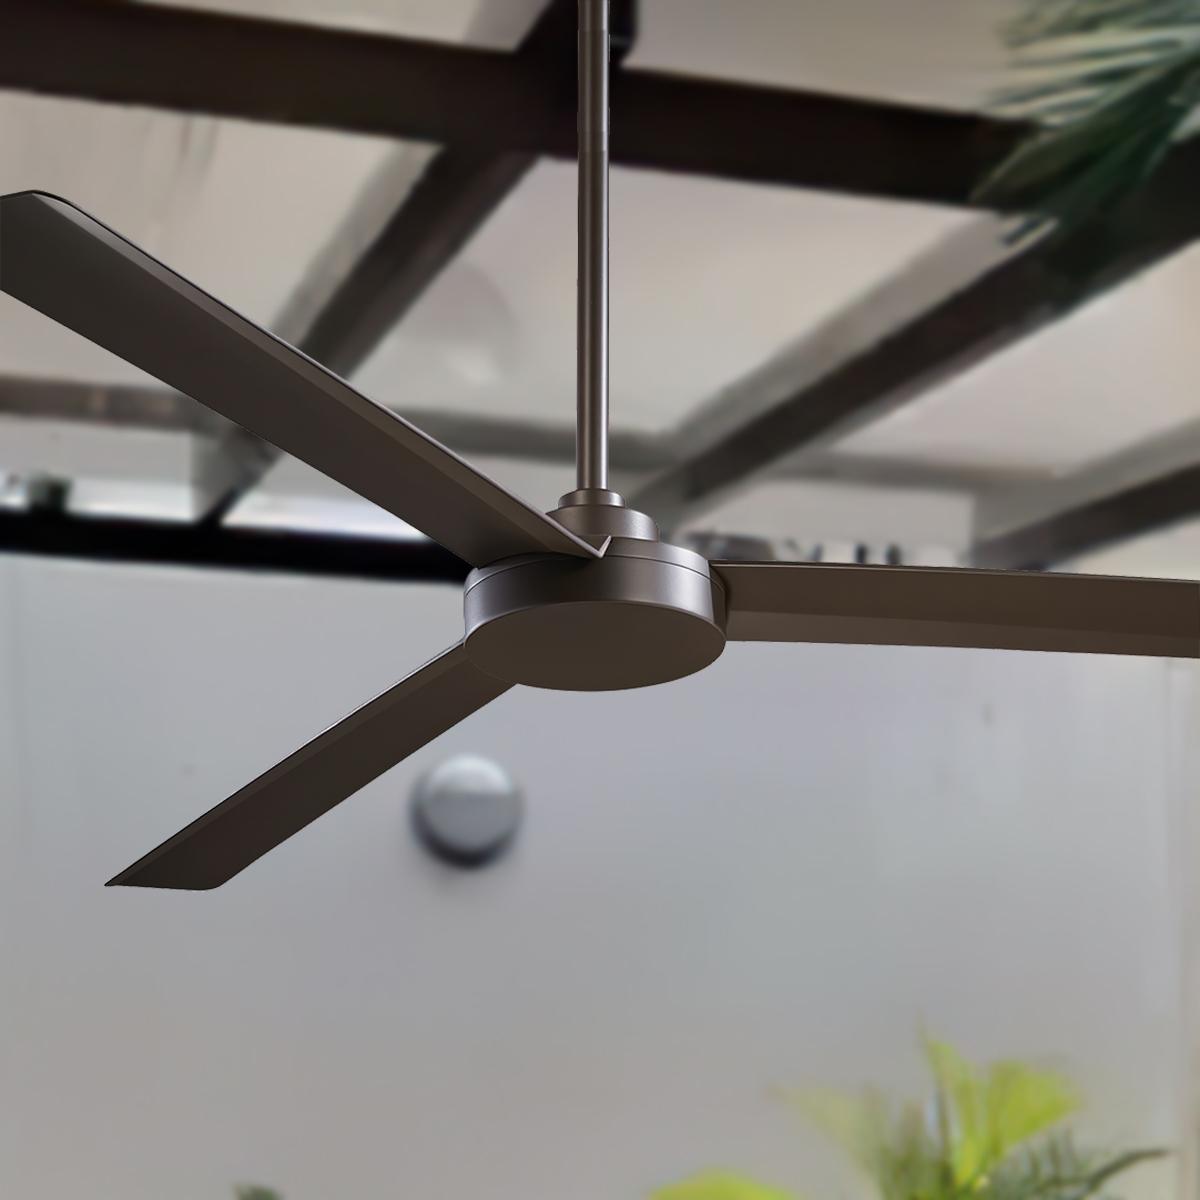 Roto XL 62 Inch Outdoor Ceiling Fan With Wall Control